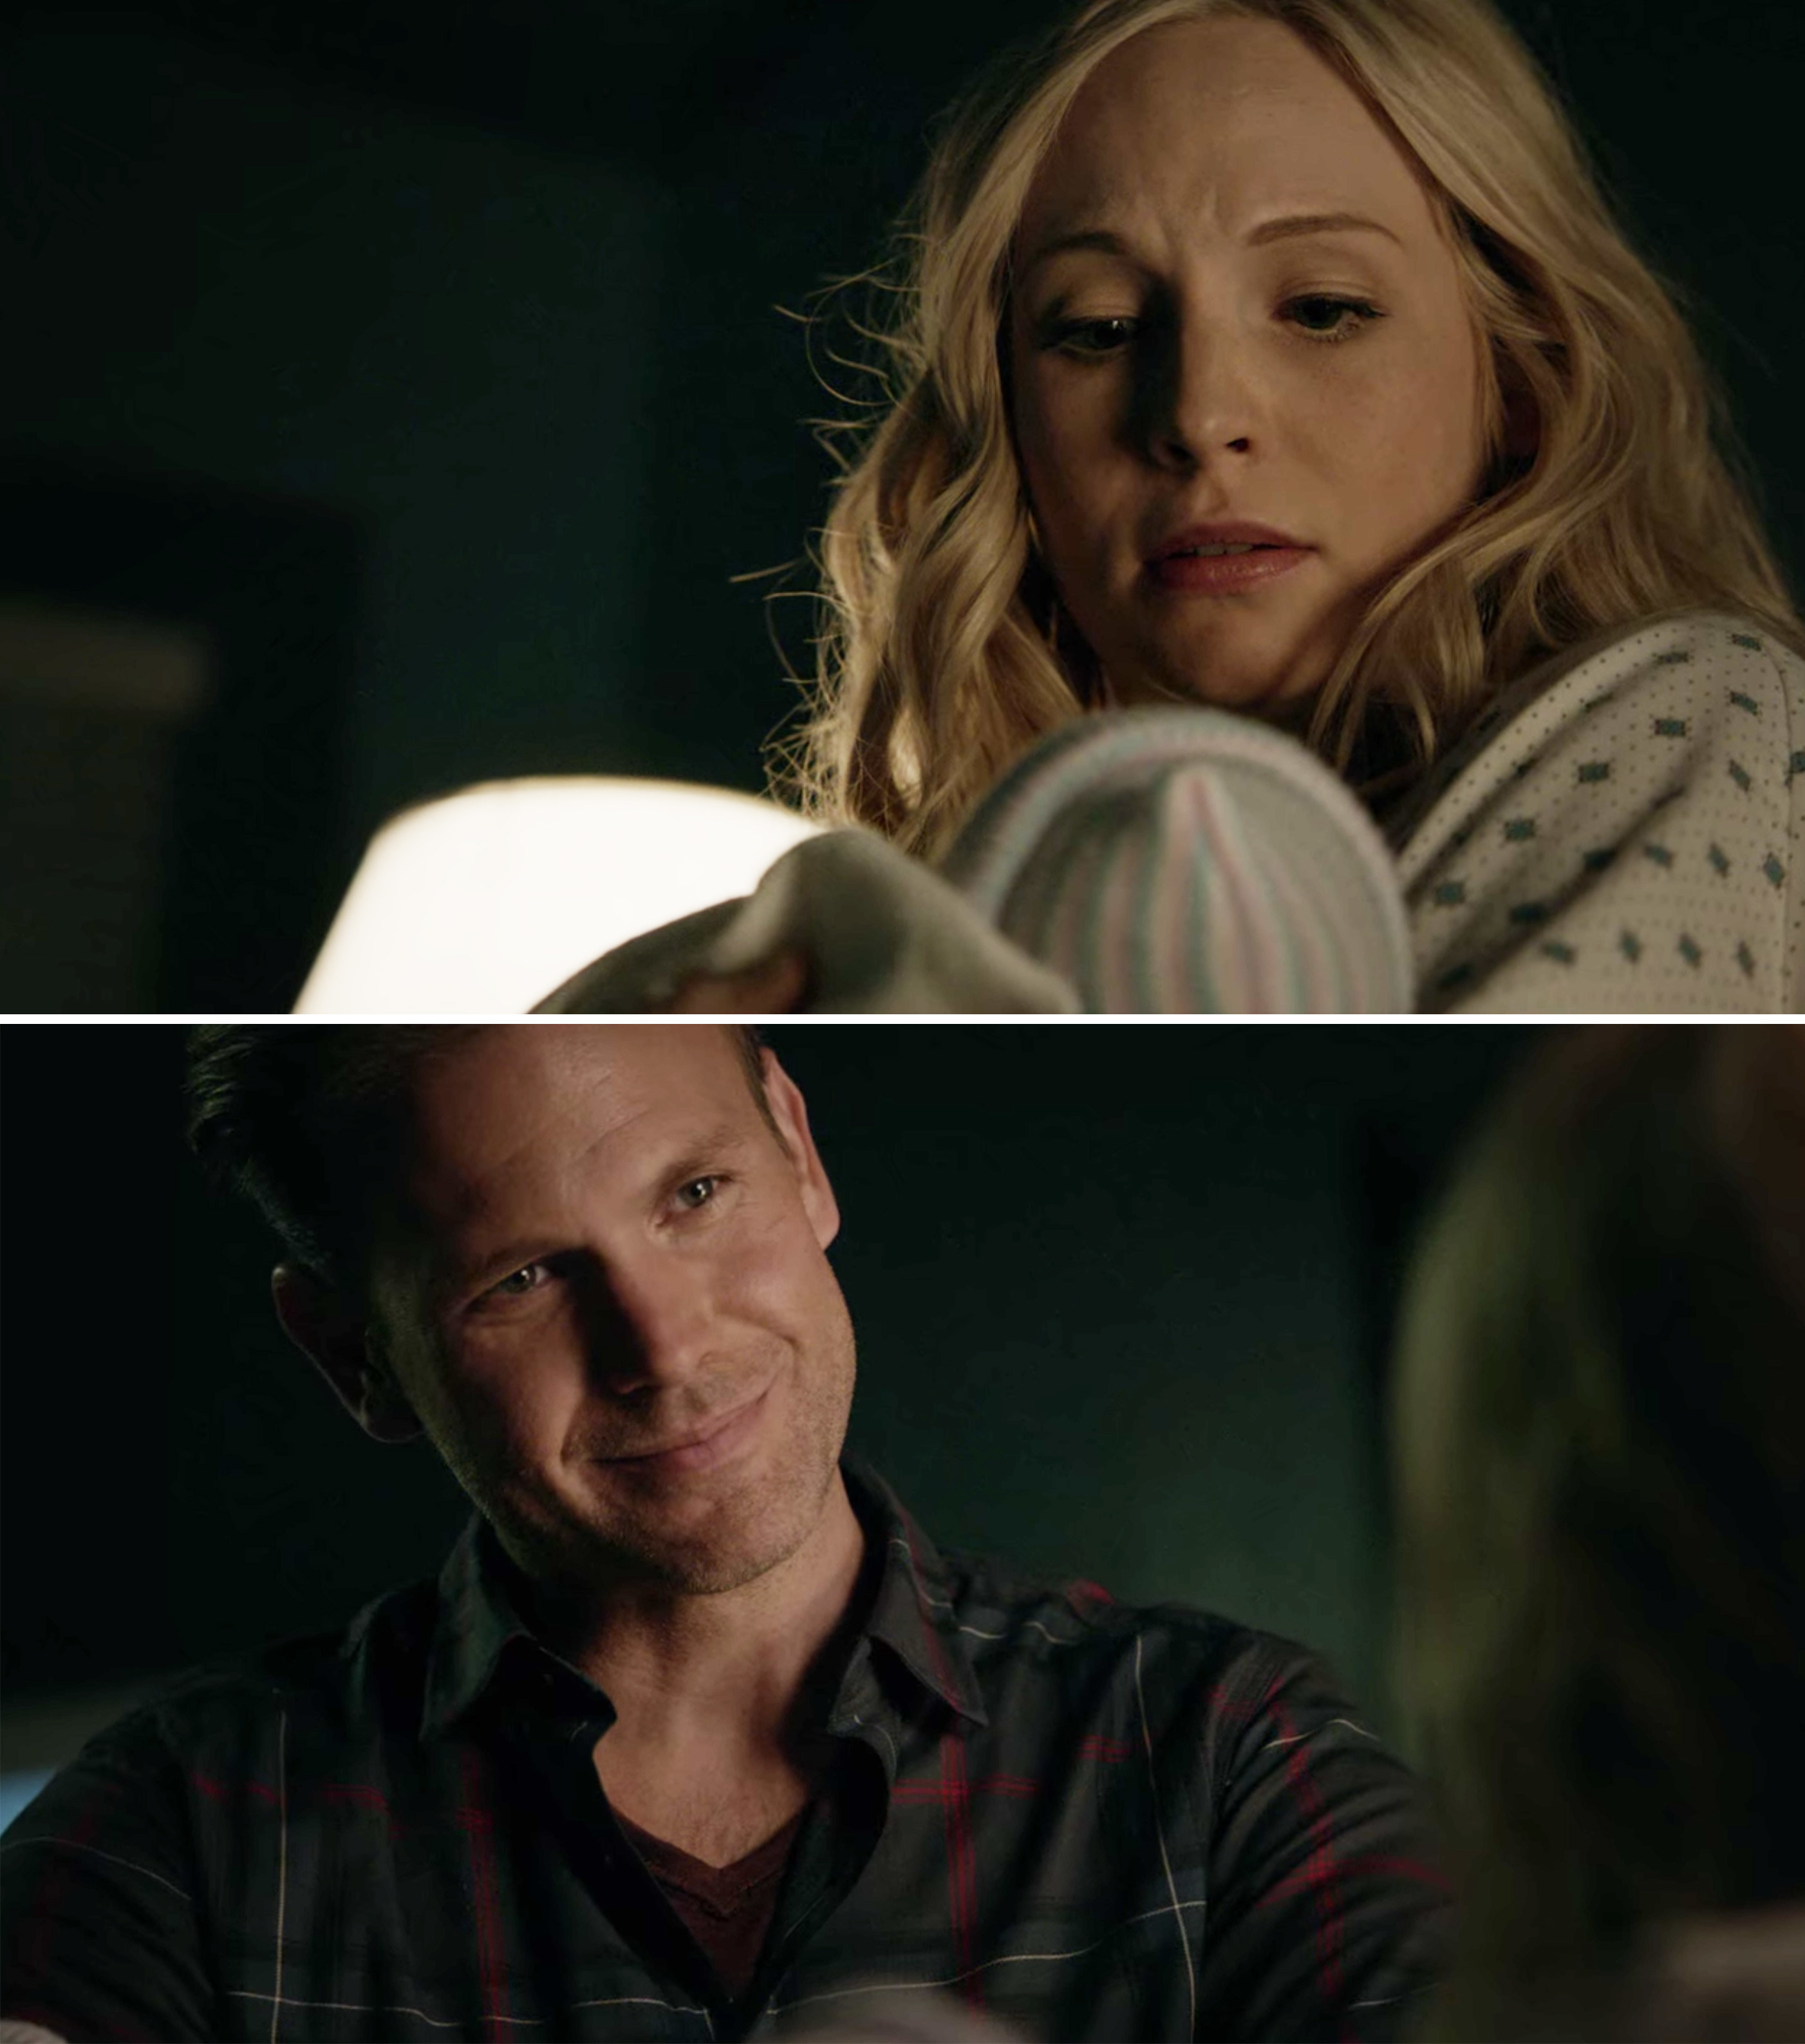 Caroline looking down at one of her twins and Alaric smiling at them